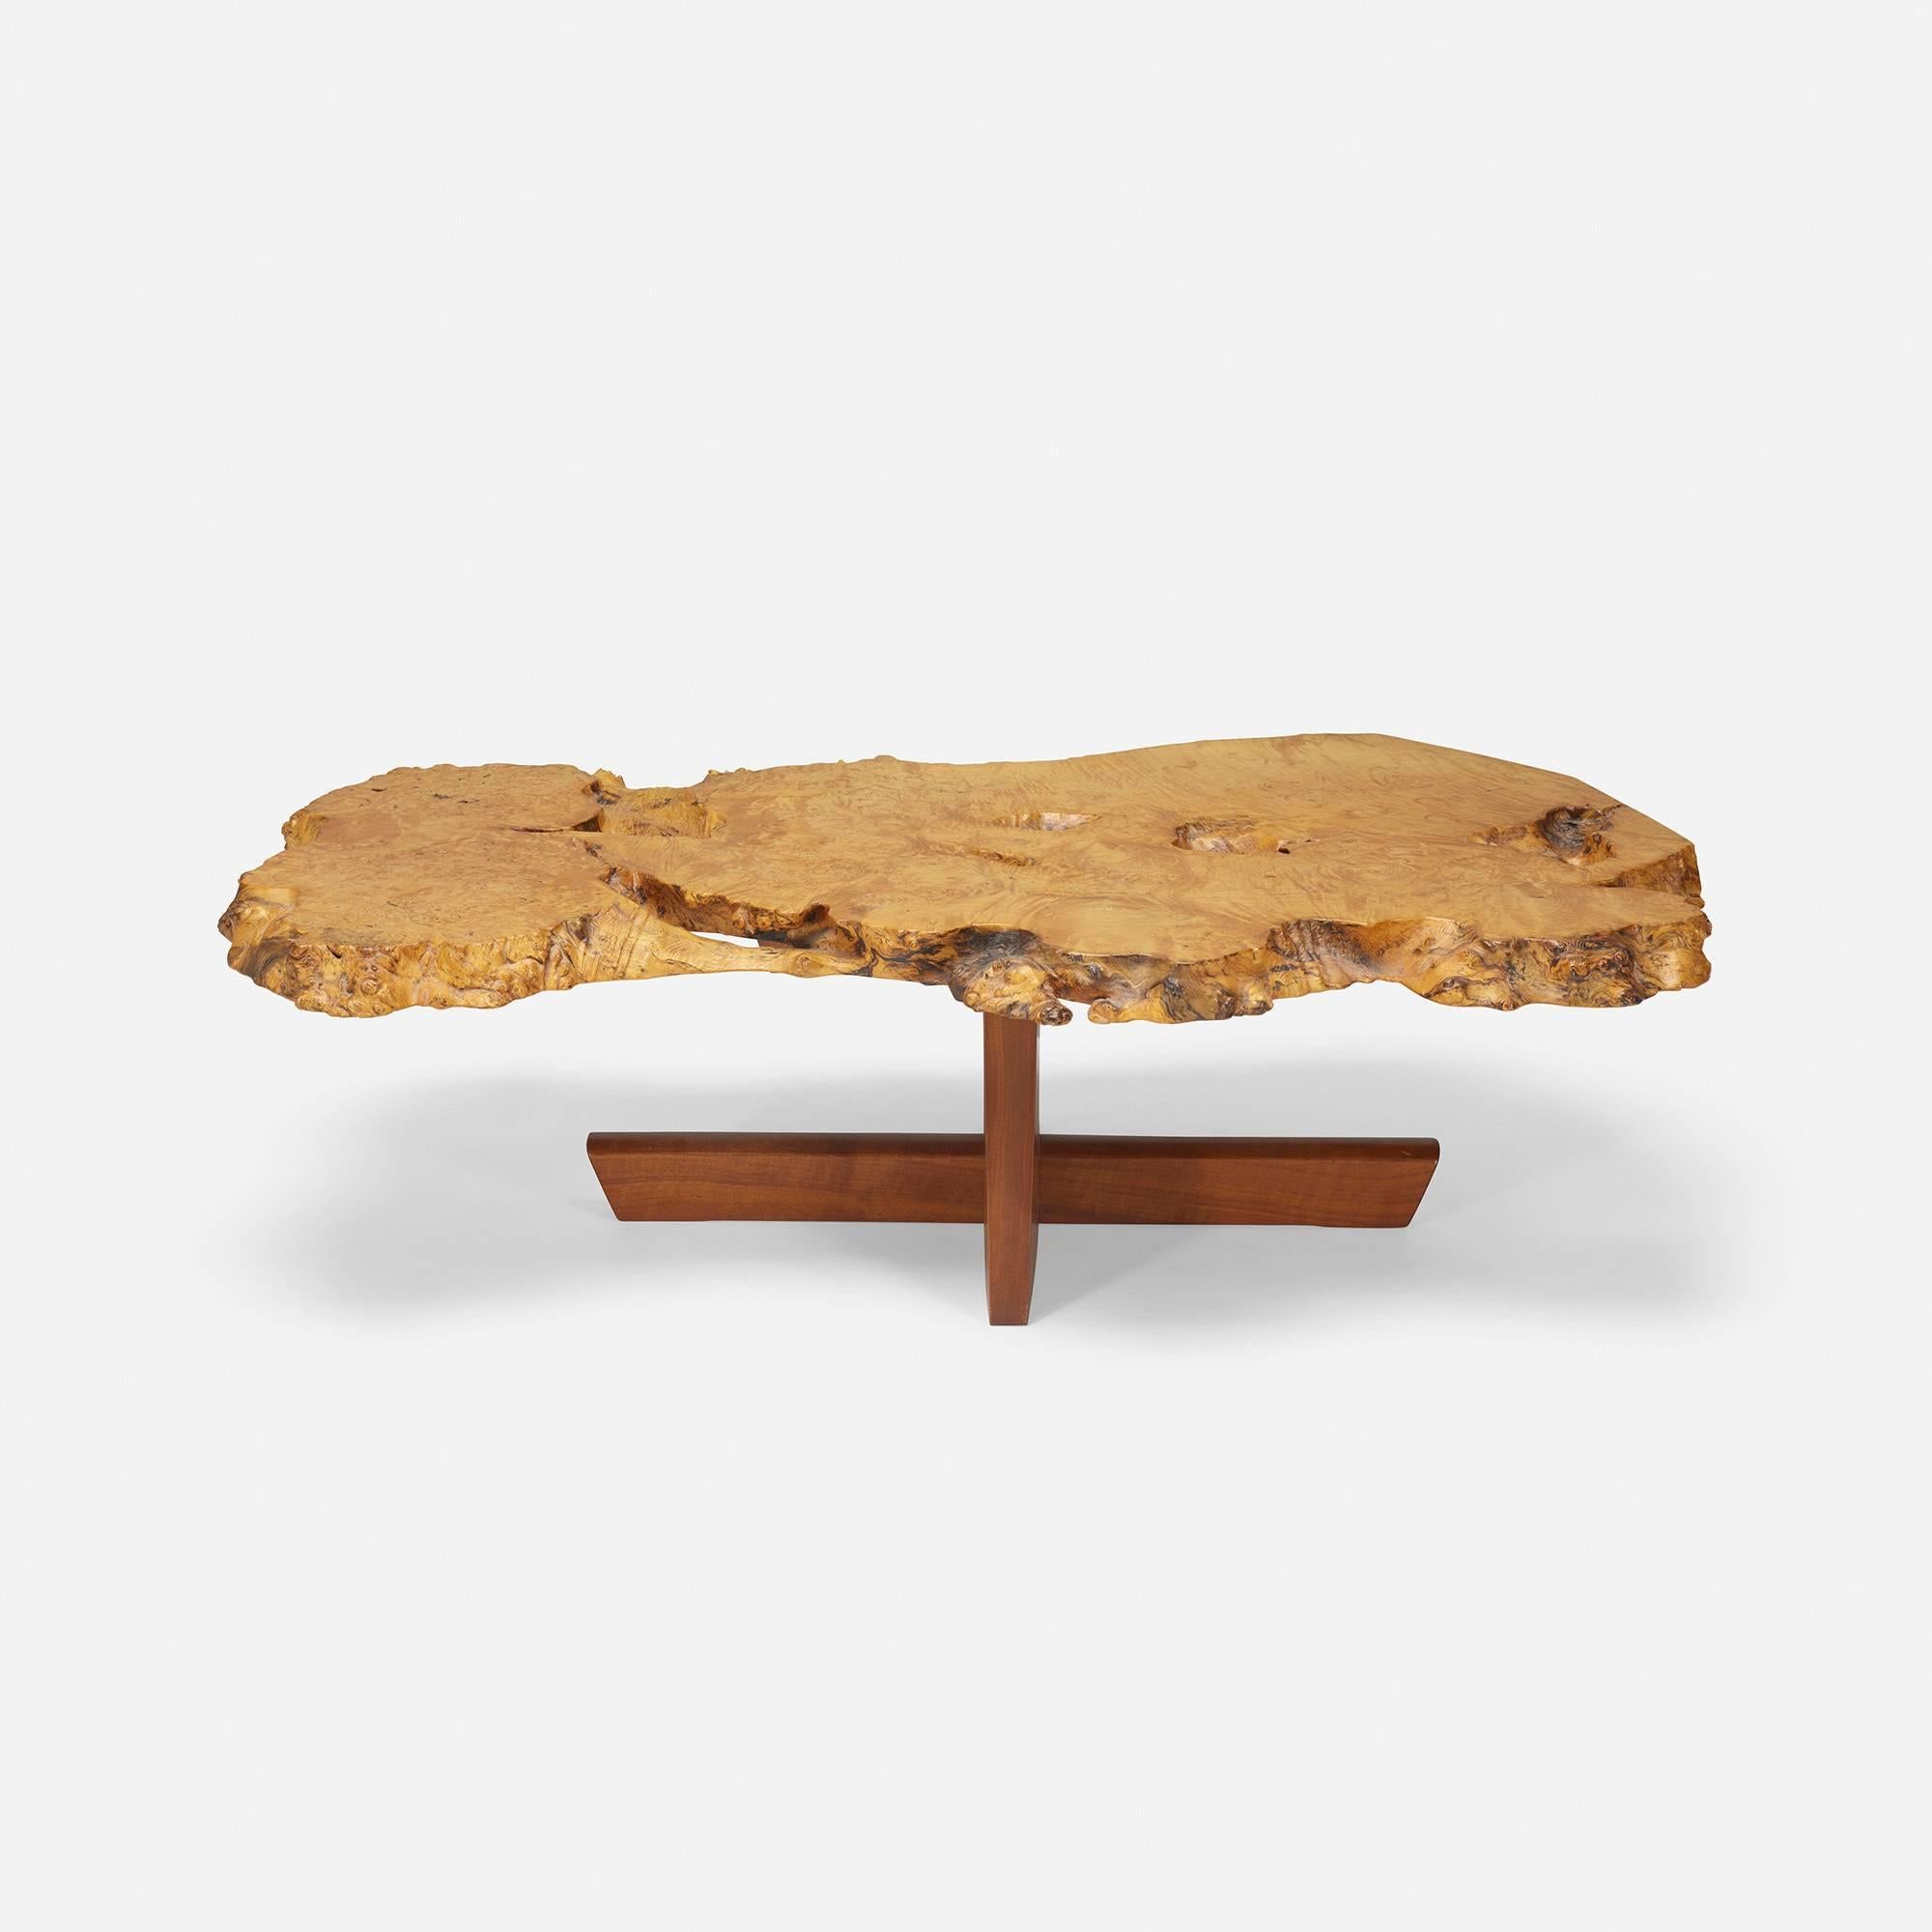 George Nakashima hand-selected this special, figured tabletop at the request of the original owners. The expressive and unusually thick slab top displays numerous fissures, recesses, burls, knots, continuous free edge and a naturally formed 'bridge'